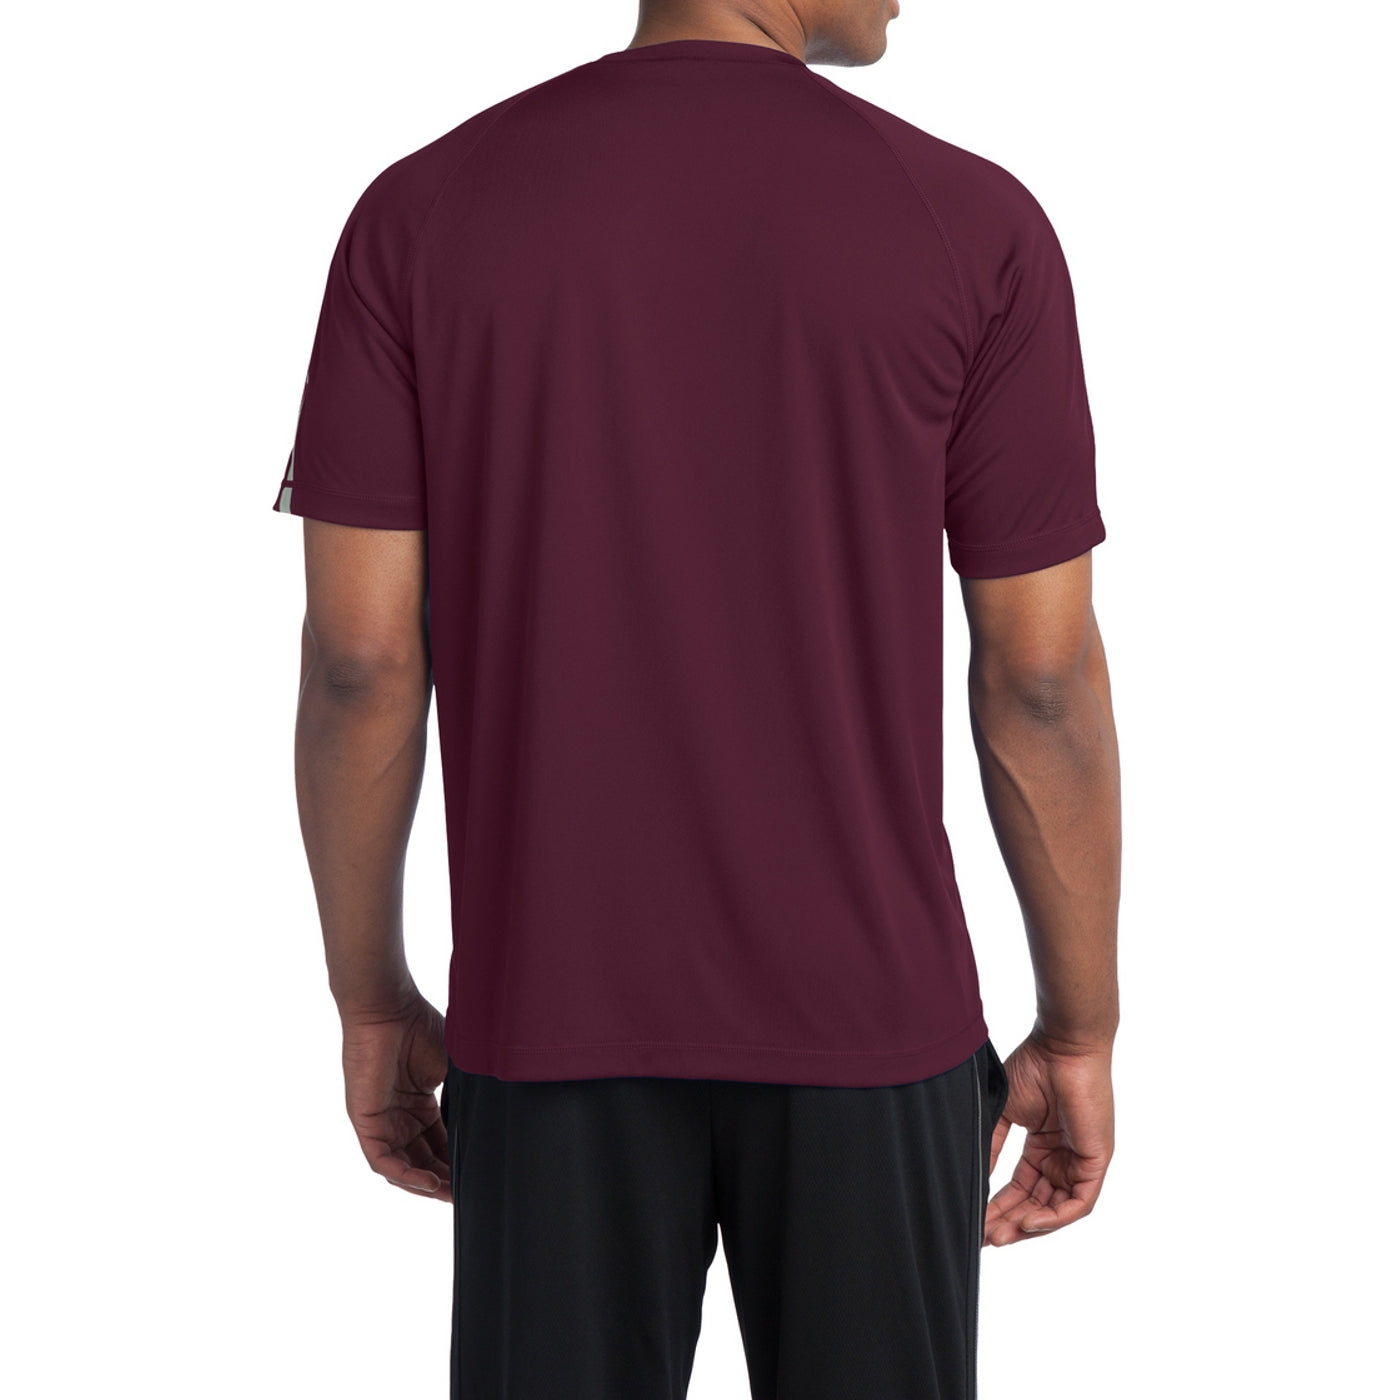 Men's Colorblock PosiCharge Competitor Tee - Maroon/ Silver